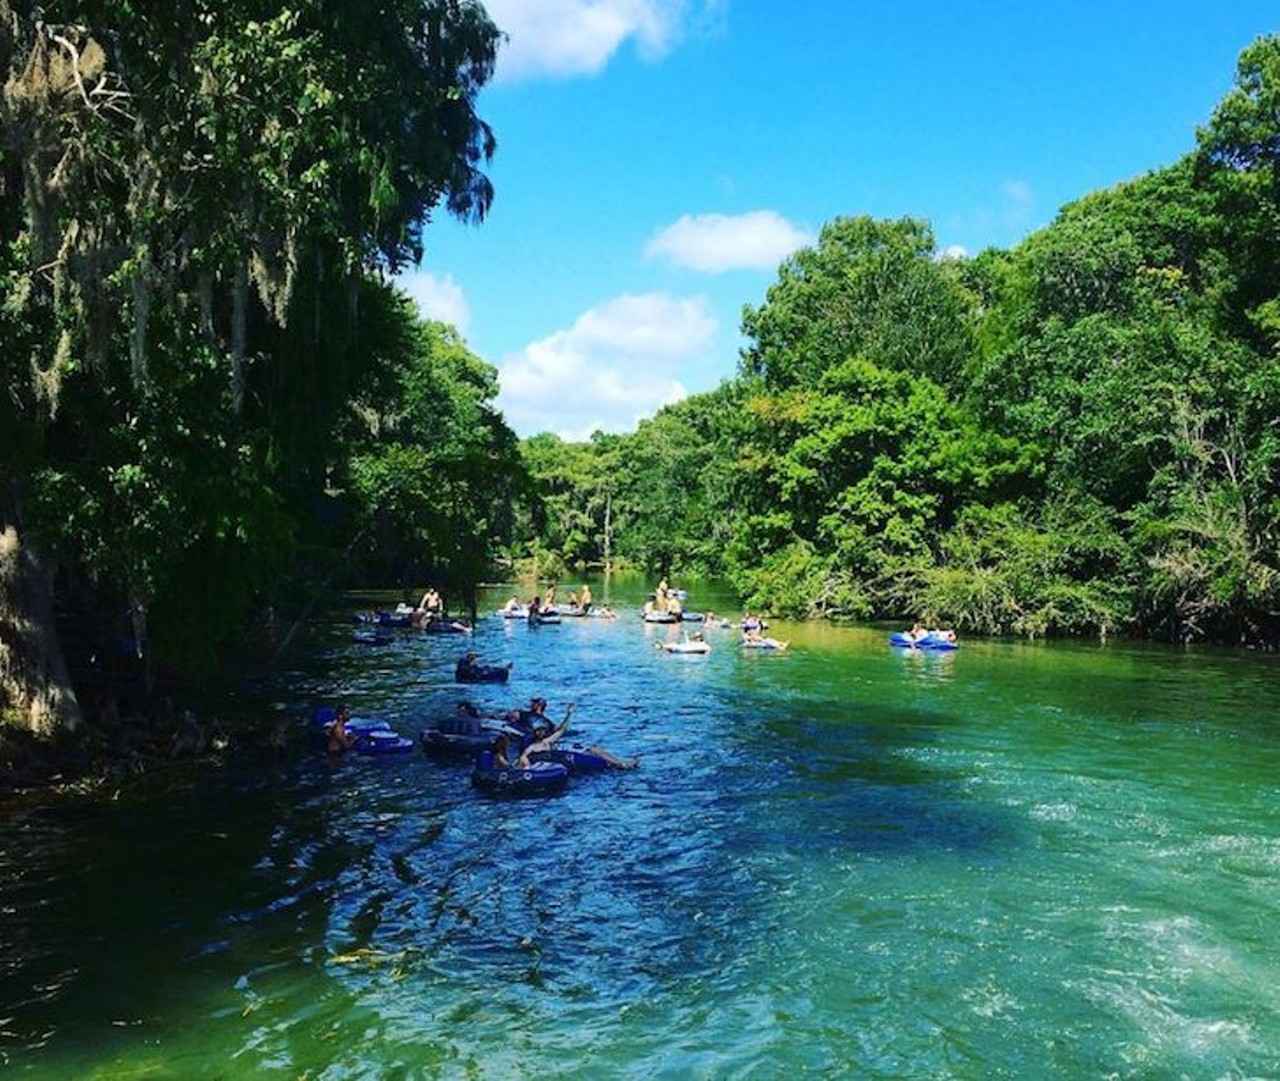 Chipola River
Johnny Boy Landing, Altha, 850-762-2800
Distance: About 4 hours and 30 minutes from Orlando
Photo via campfolks/Instagram